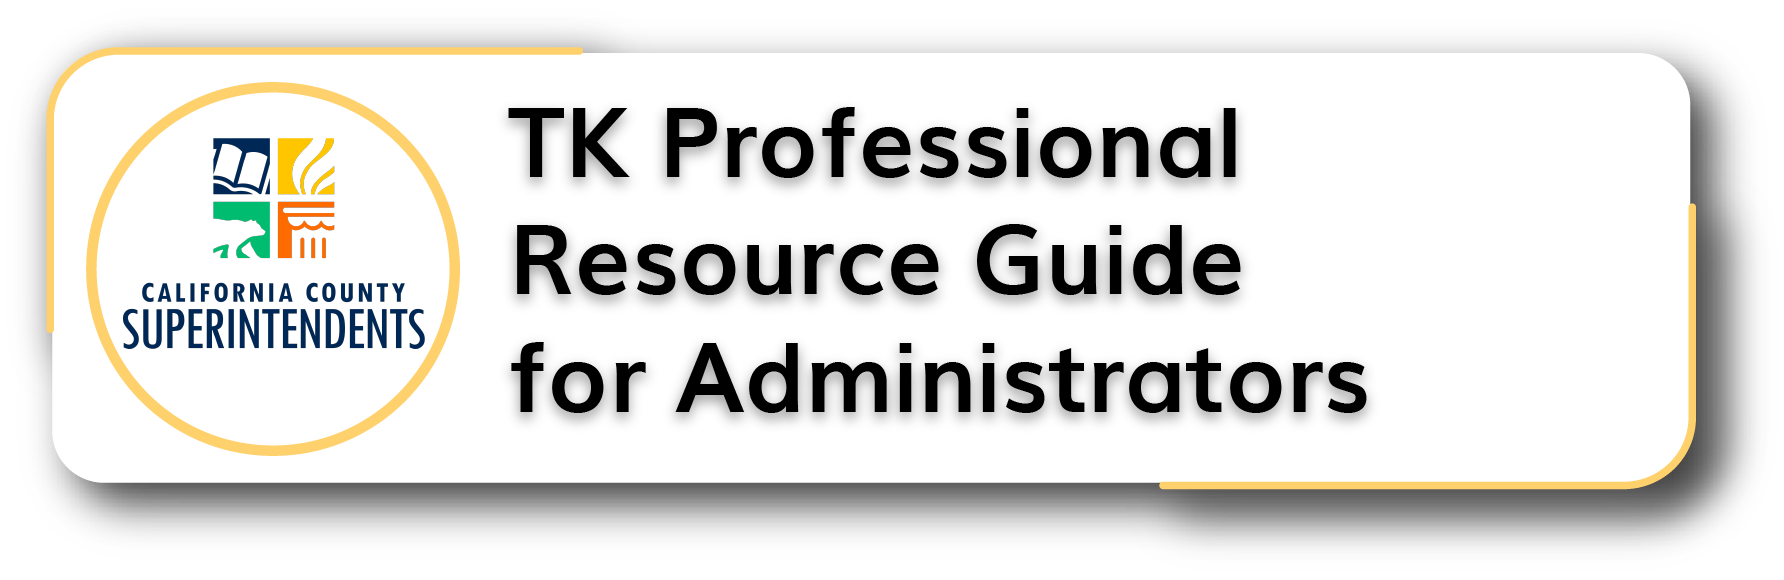 TK Professional Resource Guide for Administrators Button